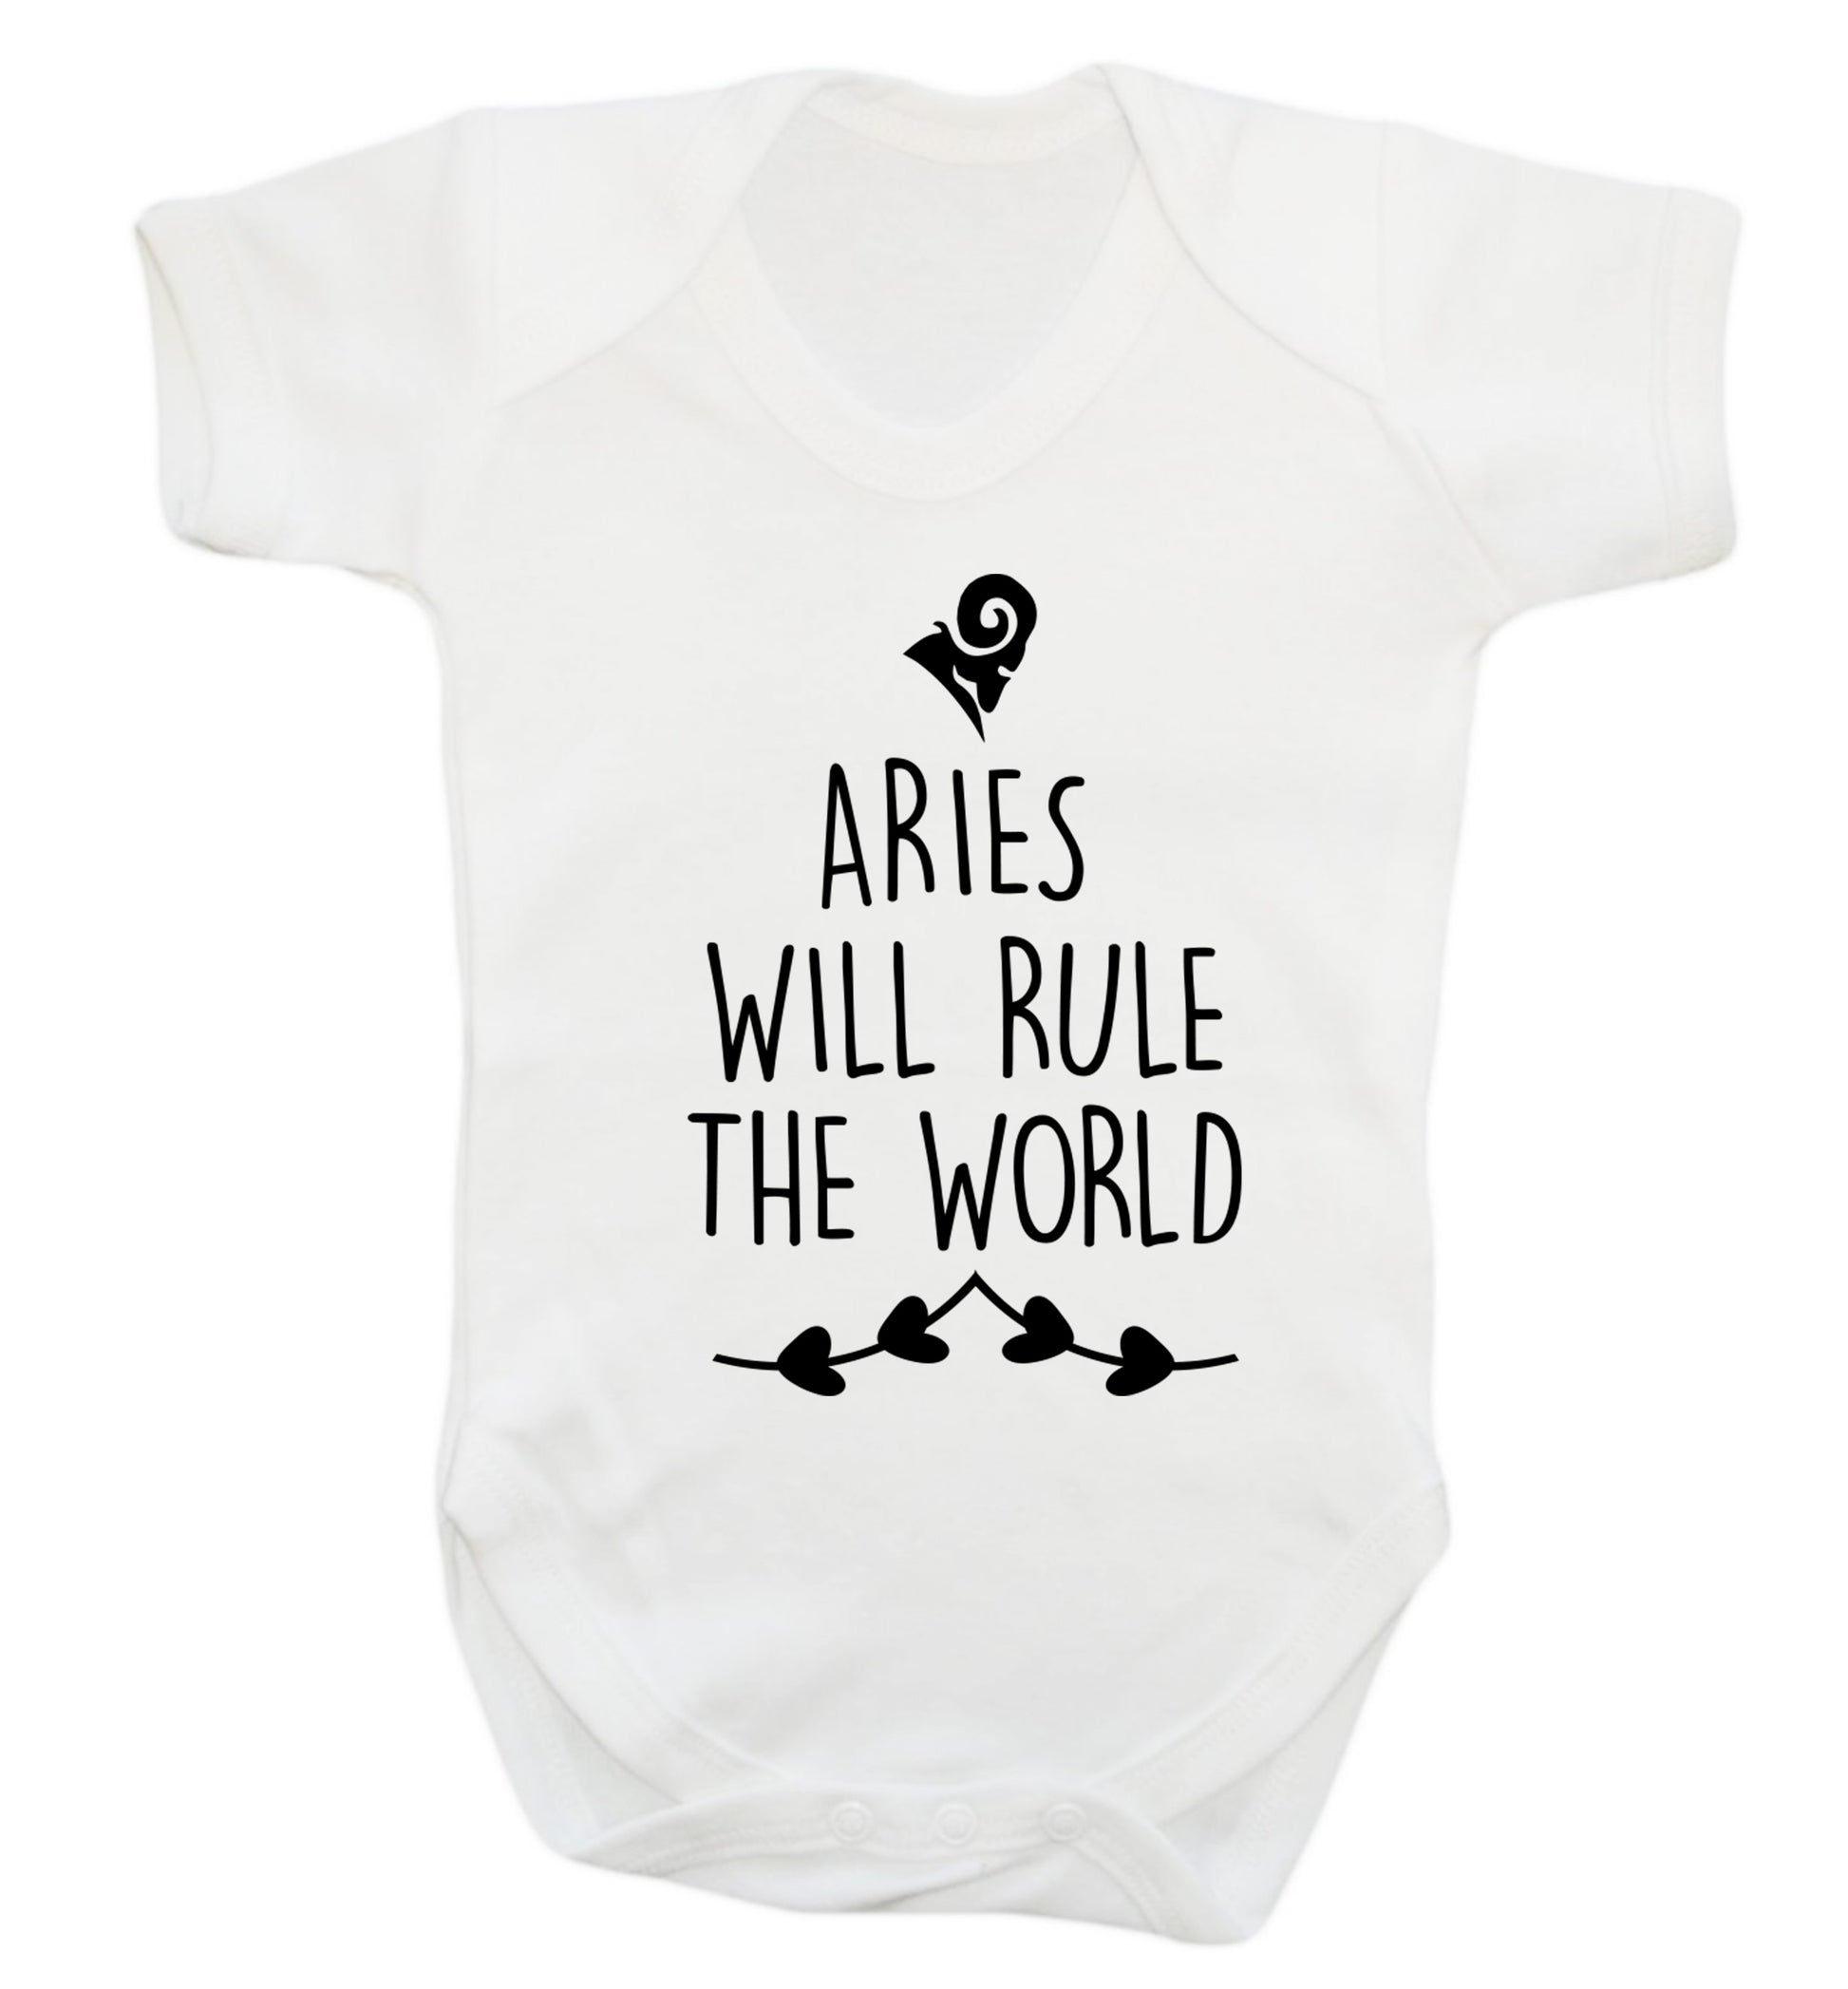 Aries will rule the world Baby Vest white 18-24 months